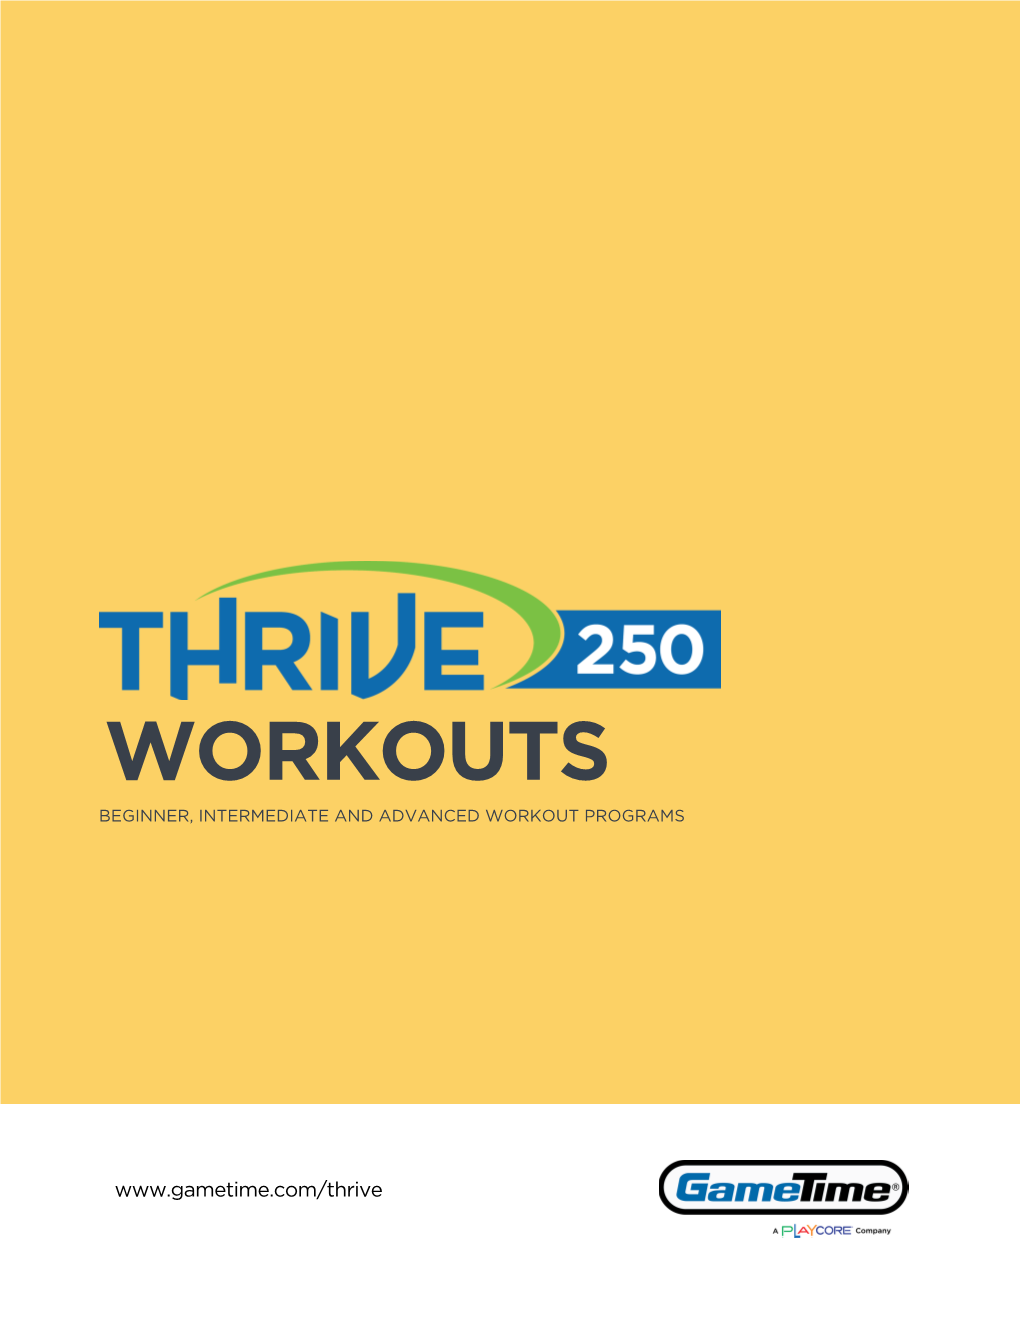 THRIVE 250 Workouts